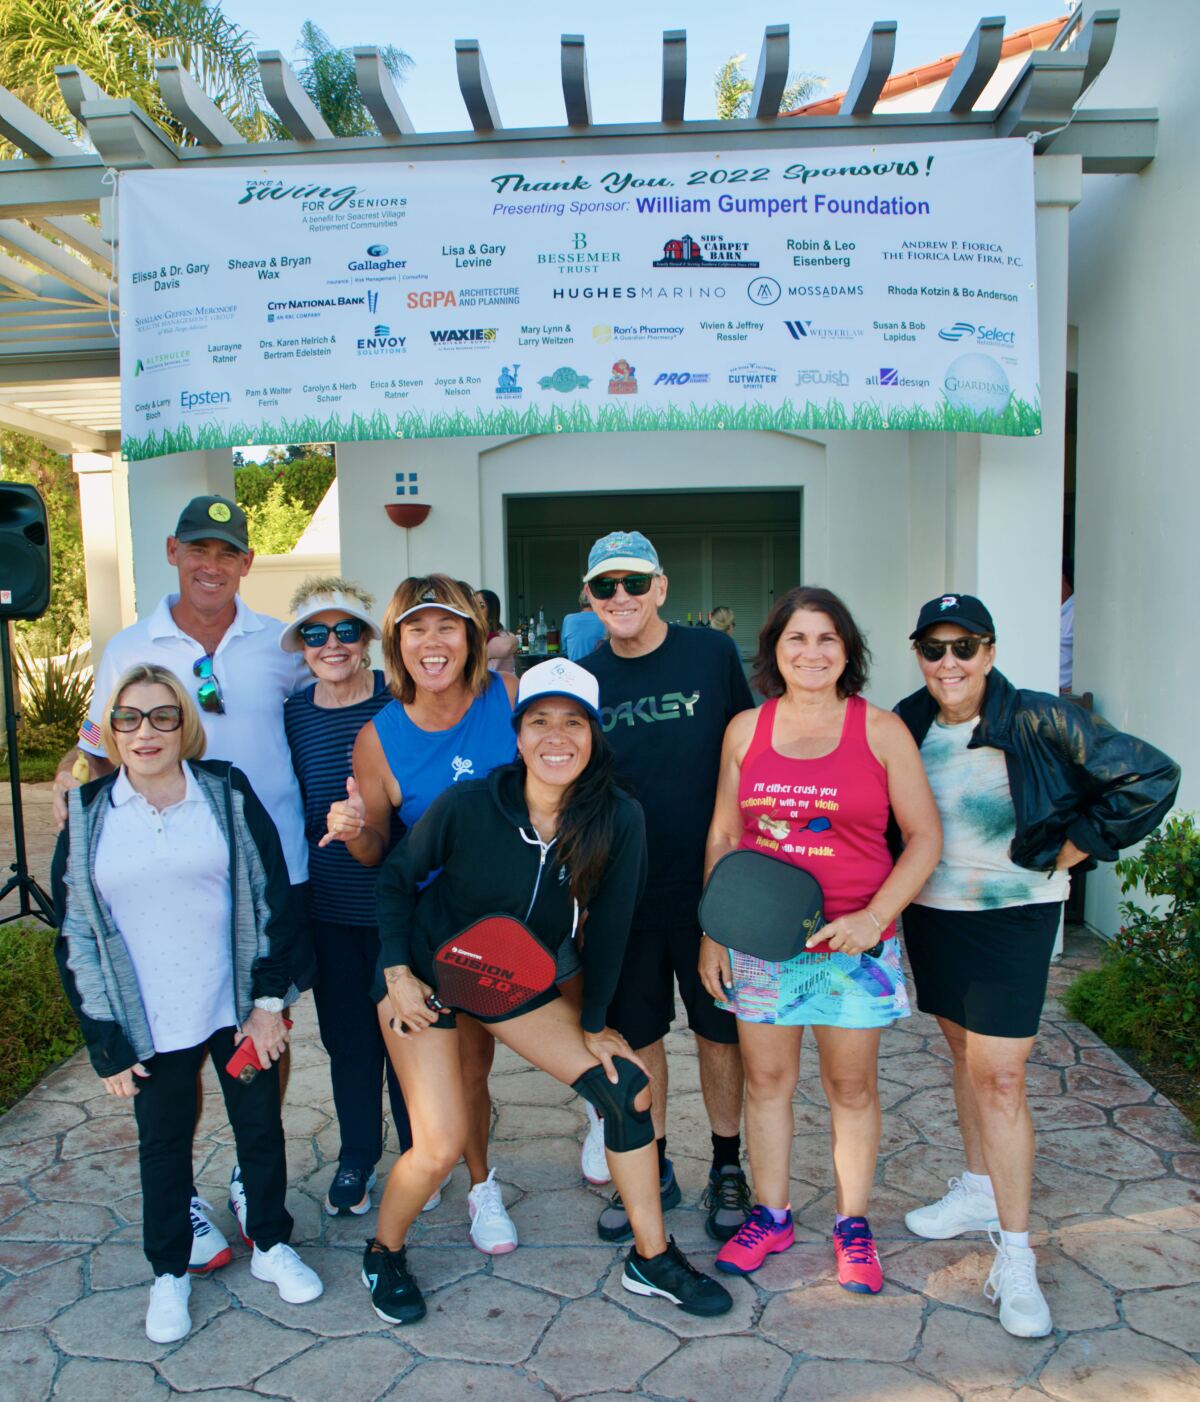 Pickleballers at the Seacrest Foundation's "Take a Swing for Seniors" event.